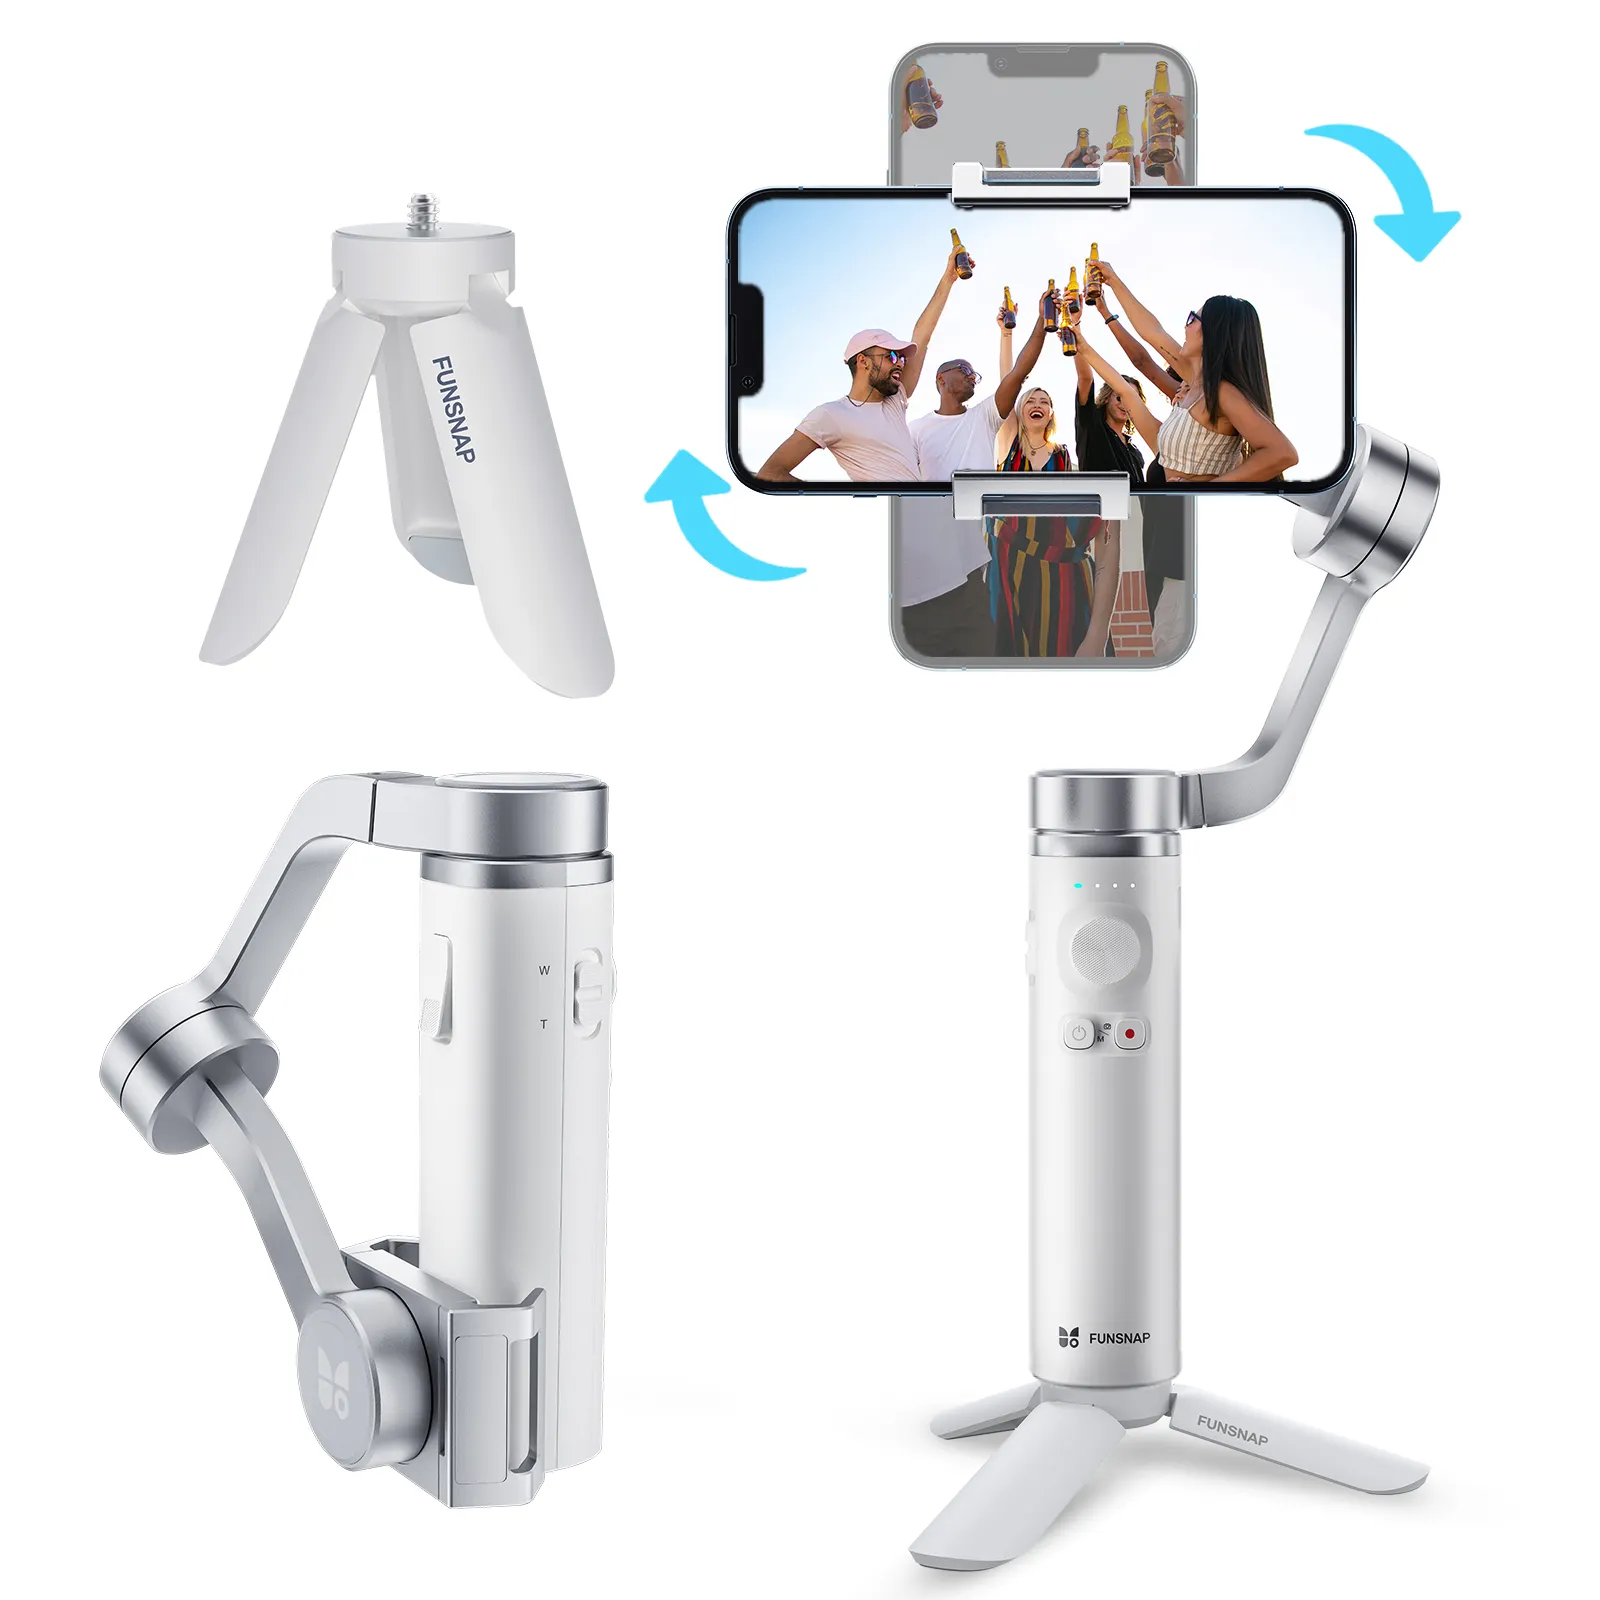 TikTok Hot Sell Funsnap Capture Pi 3Axis video stabilizer gimbal Auto Face Tracking Phone Handheld stabilizers